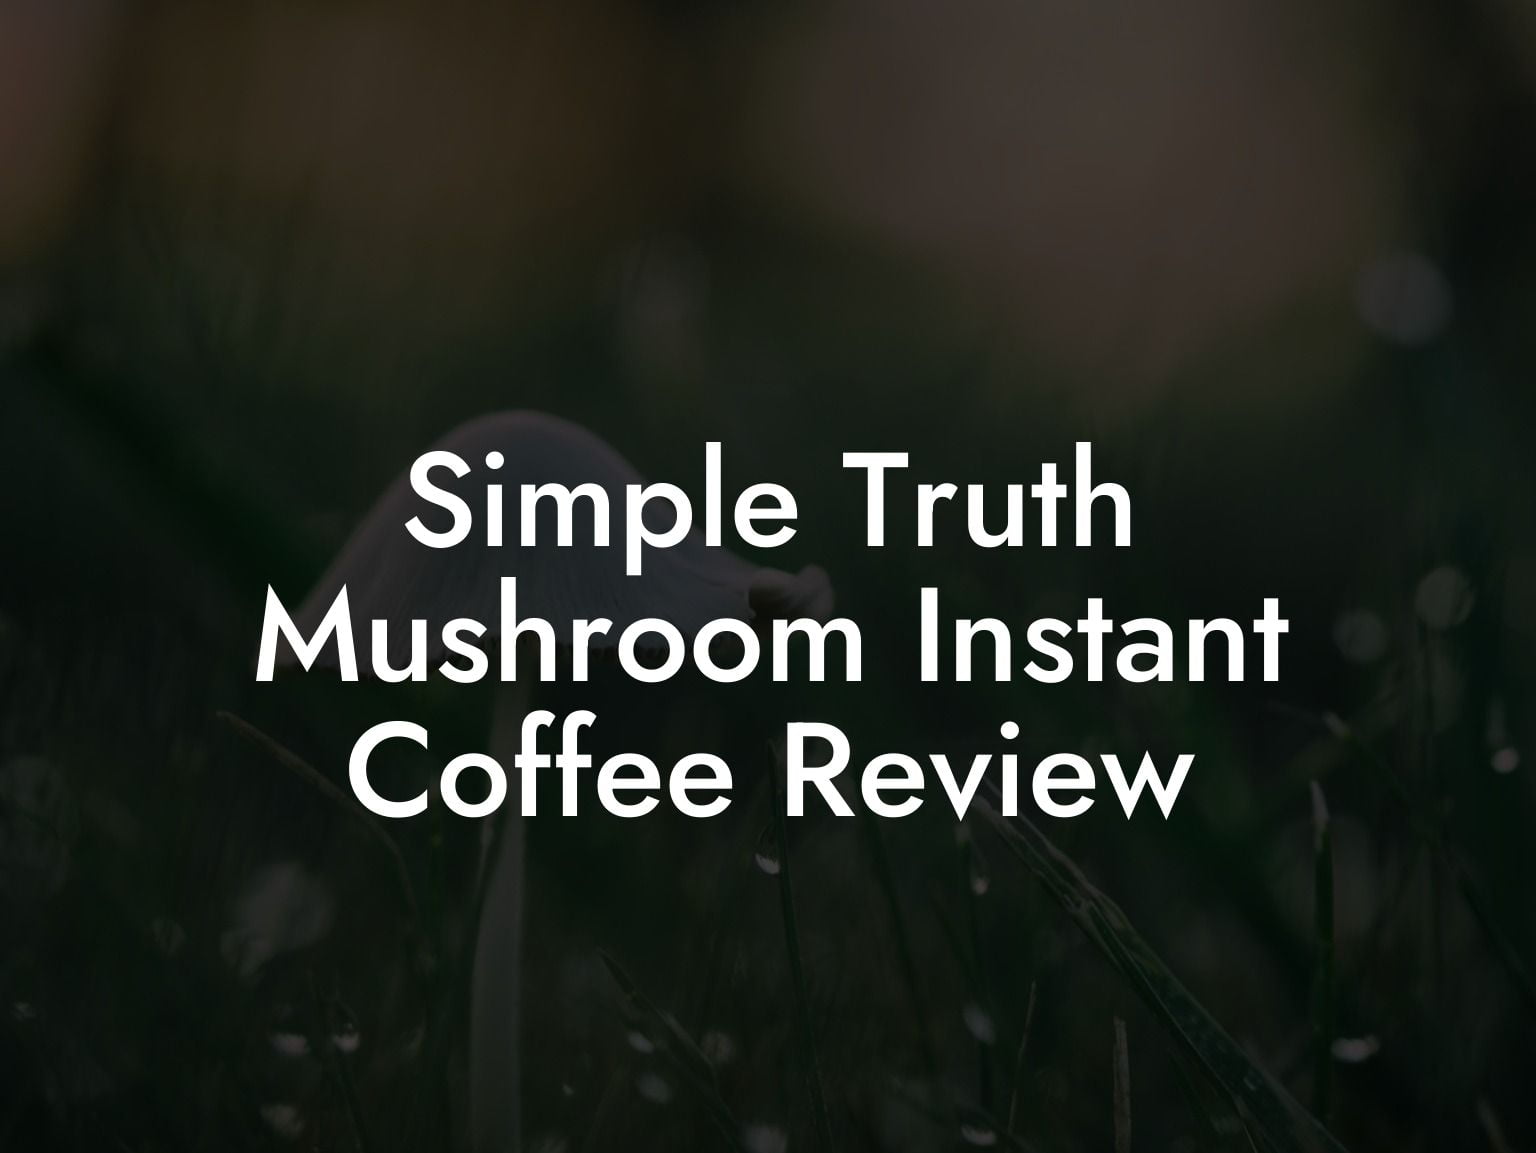 Simple Truth Mushroom Instant Coffee Review